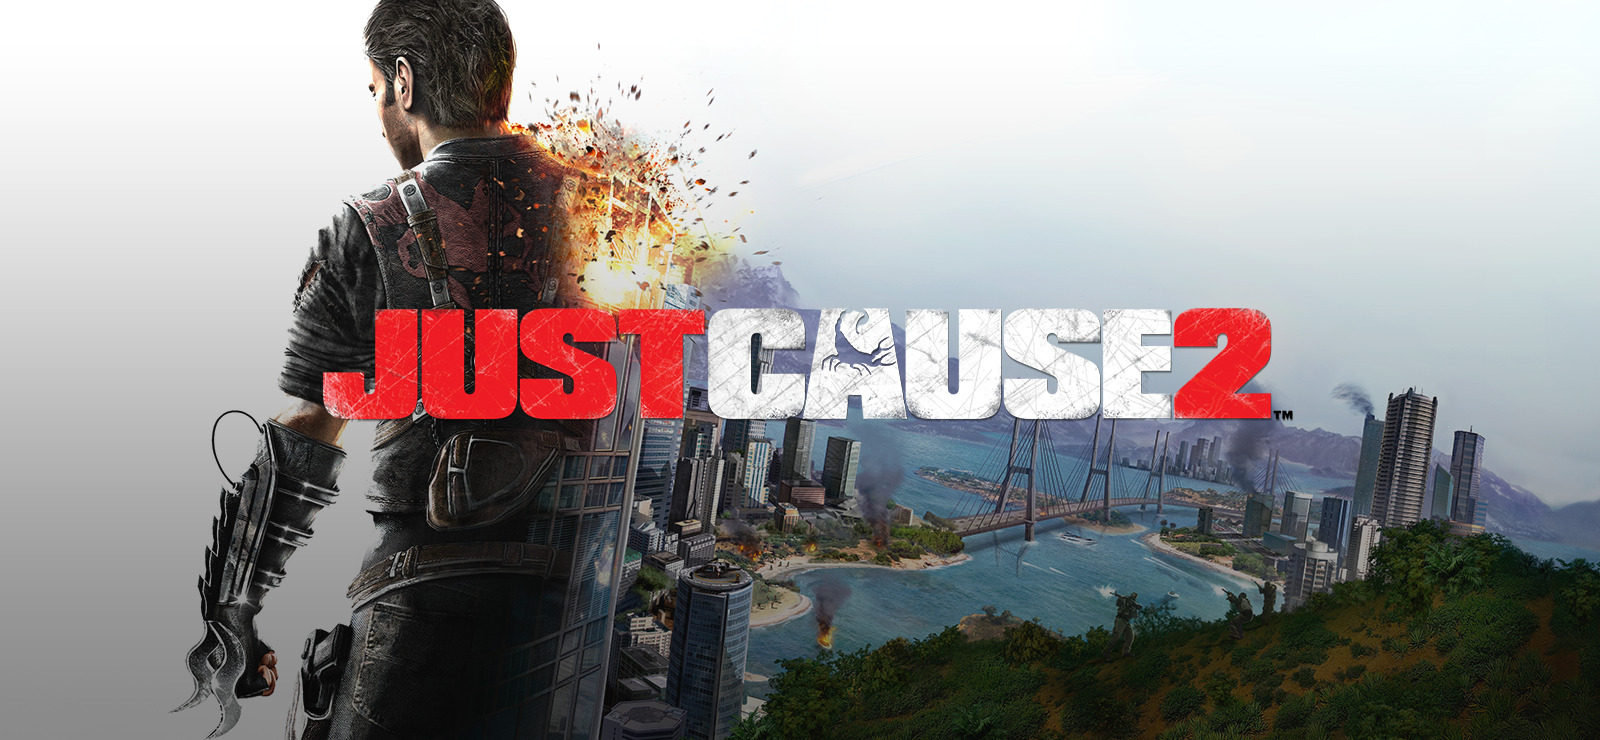 Just Cause 2 (Velocity) Free For Mobile